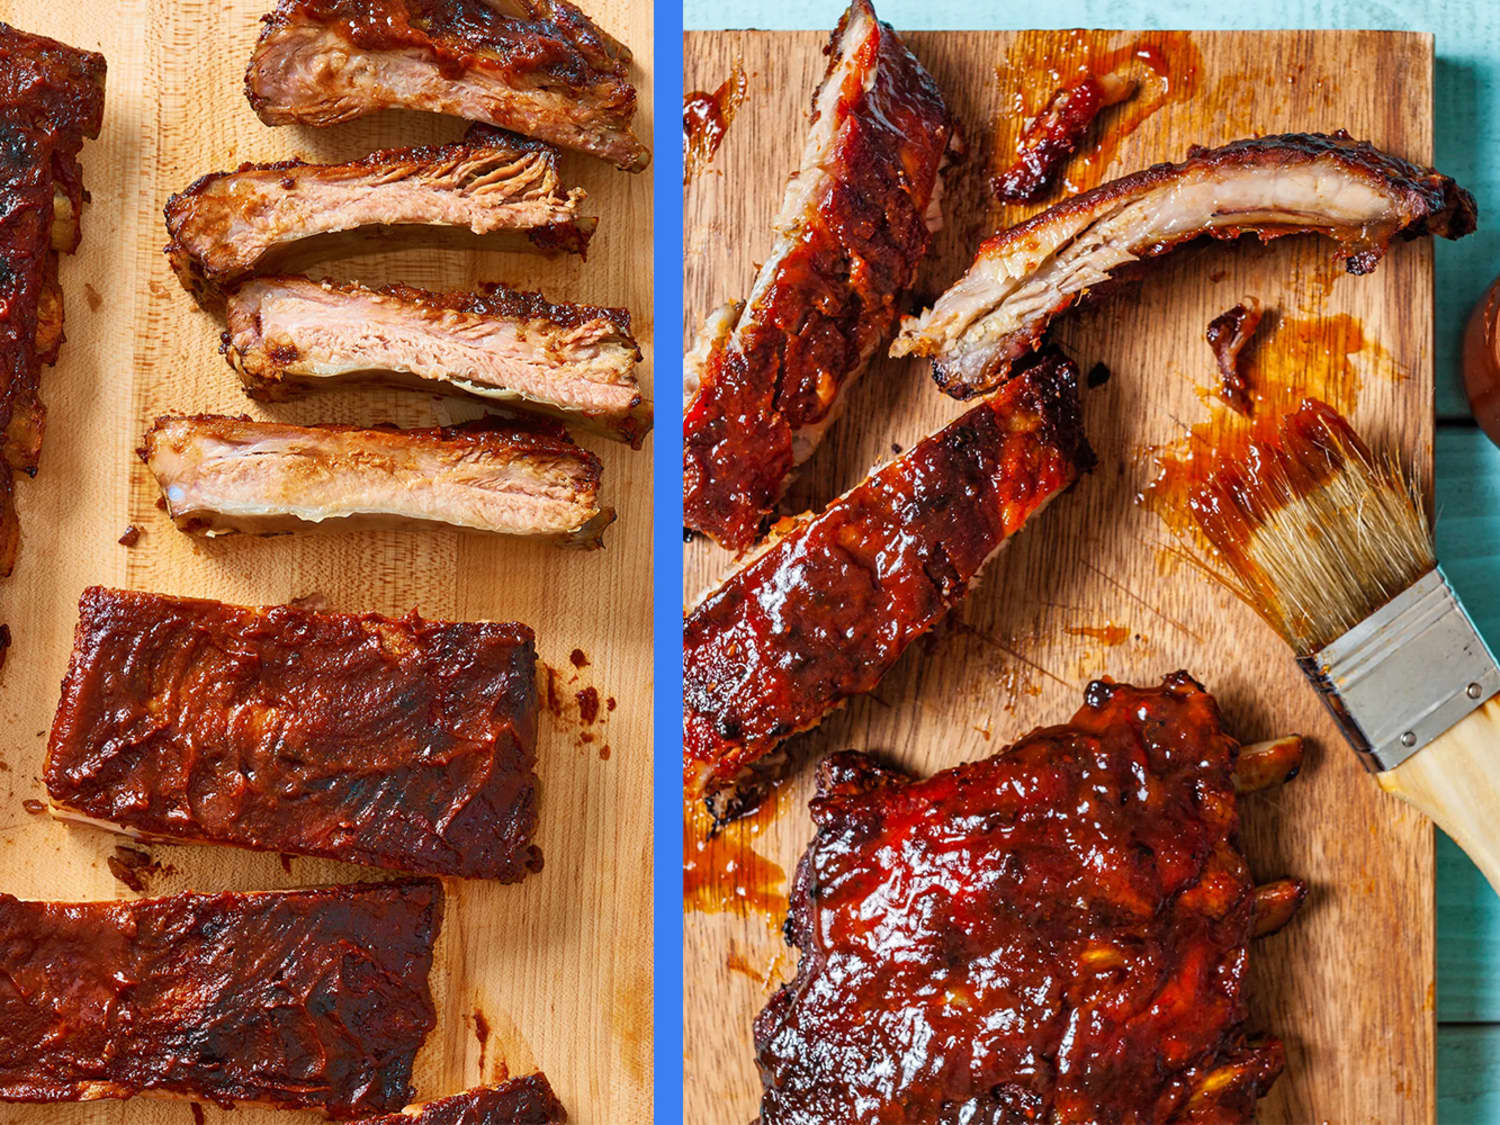 What are Baby Back Ribs vs St. Louis Ribs?